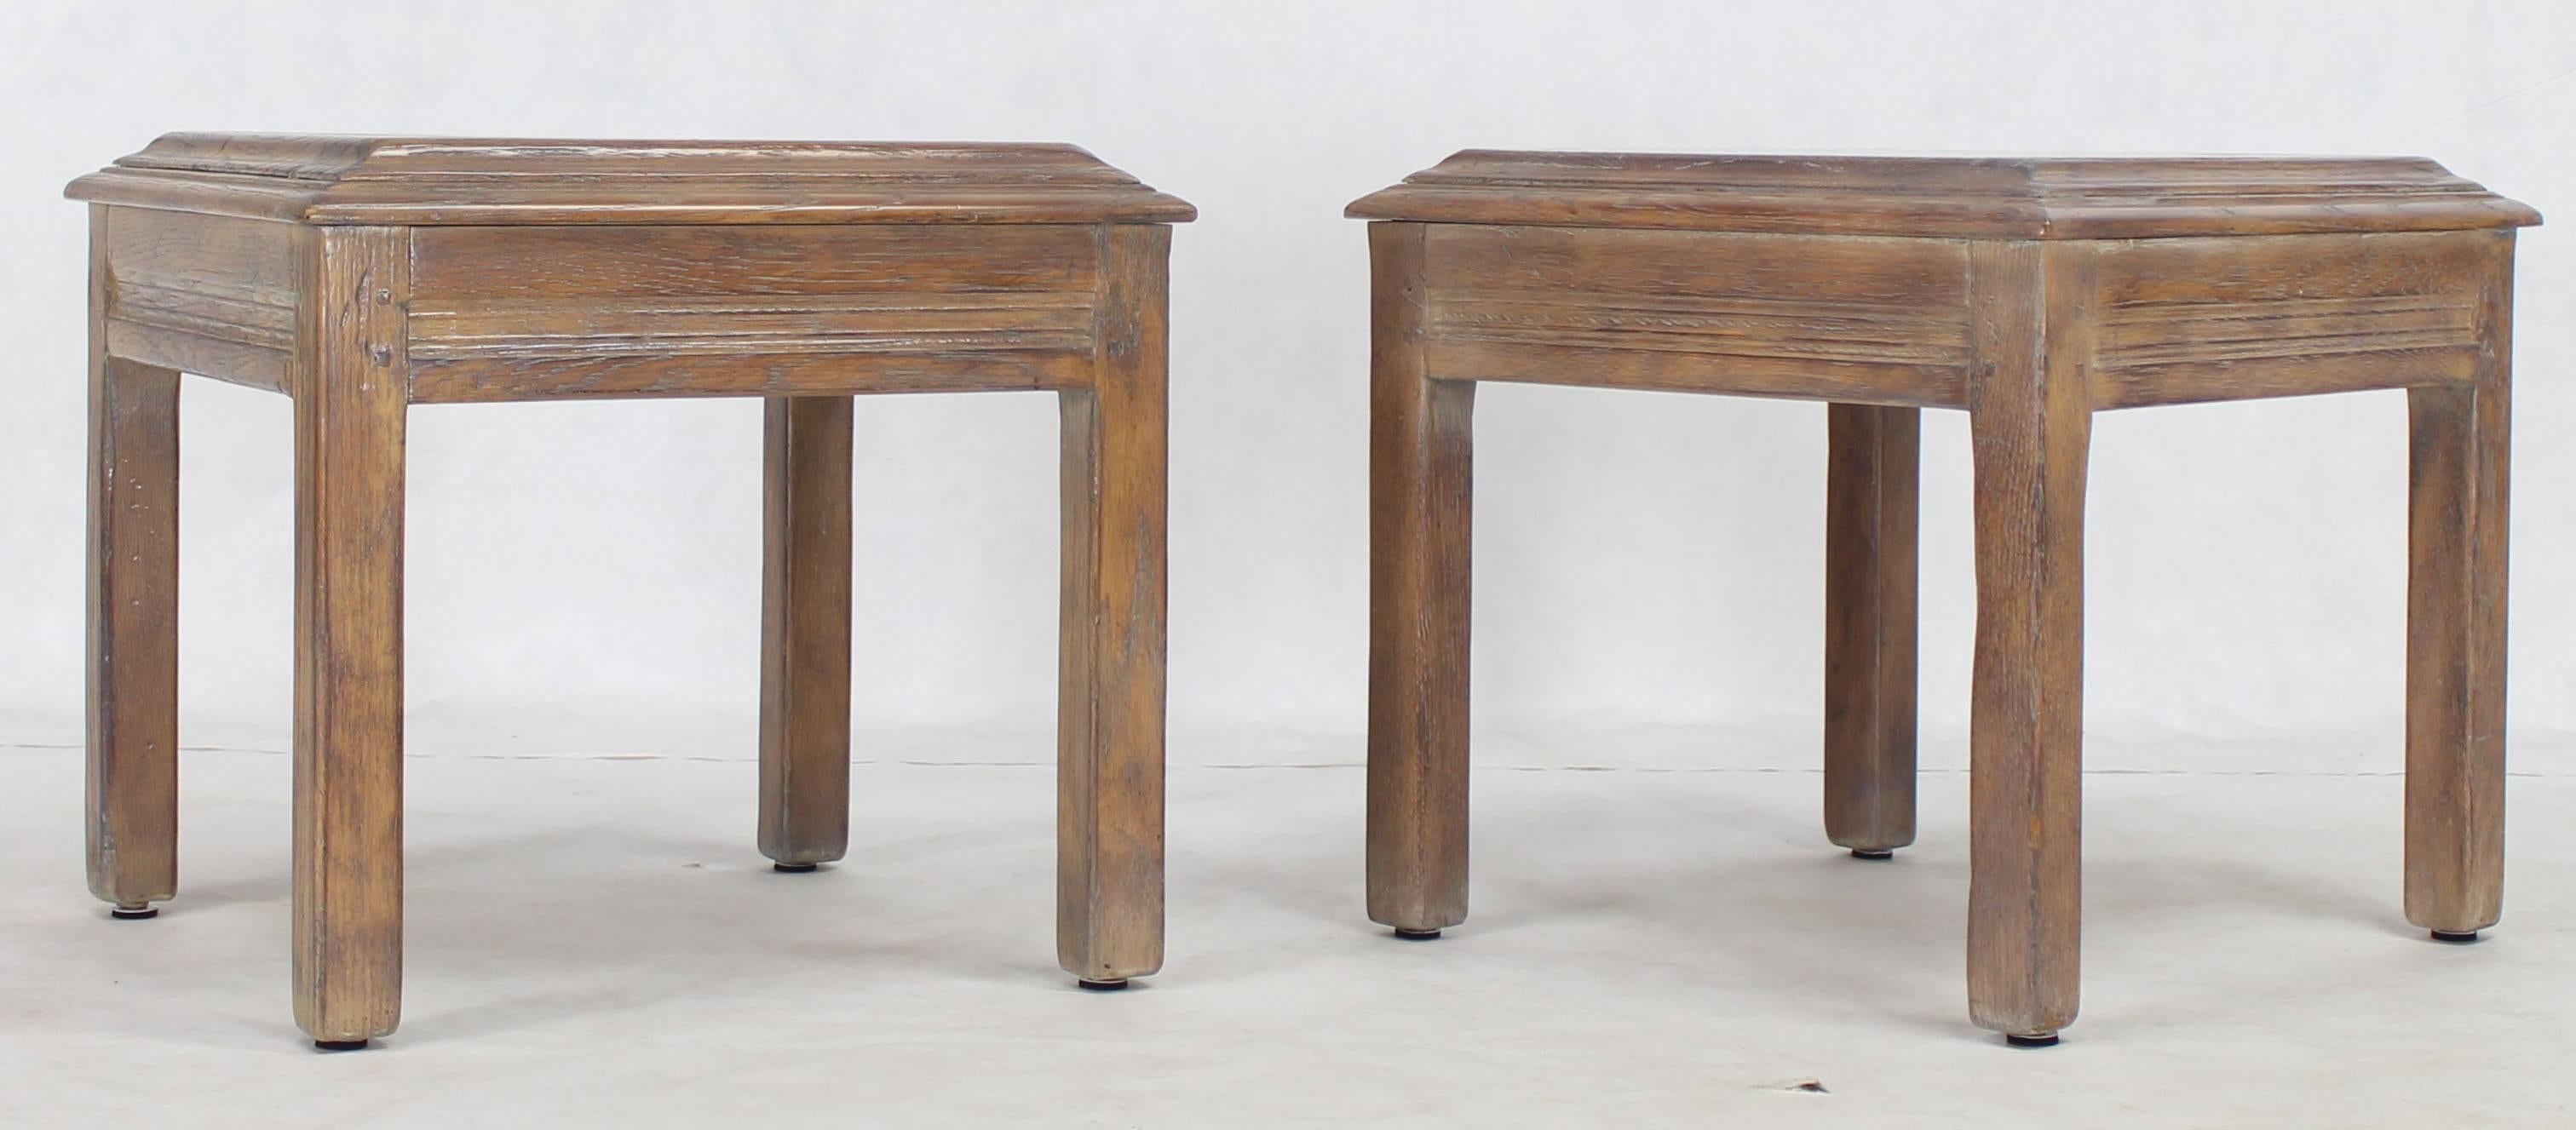 Vintage peg jointed square pickled oak end occasional tables stands. Could be used as bench.